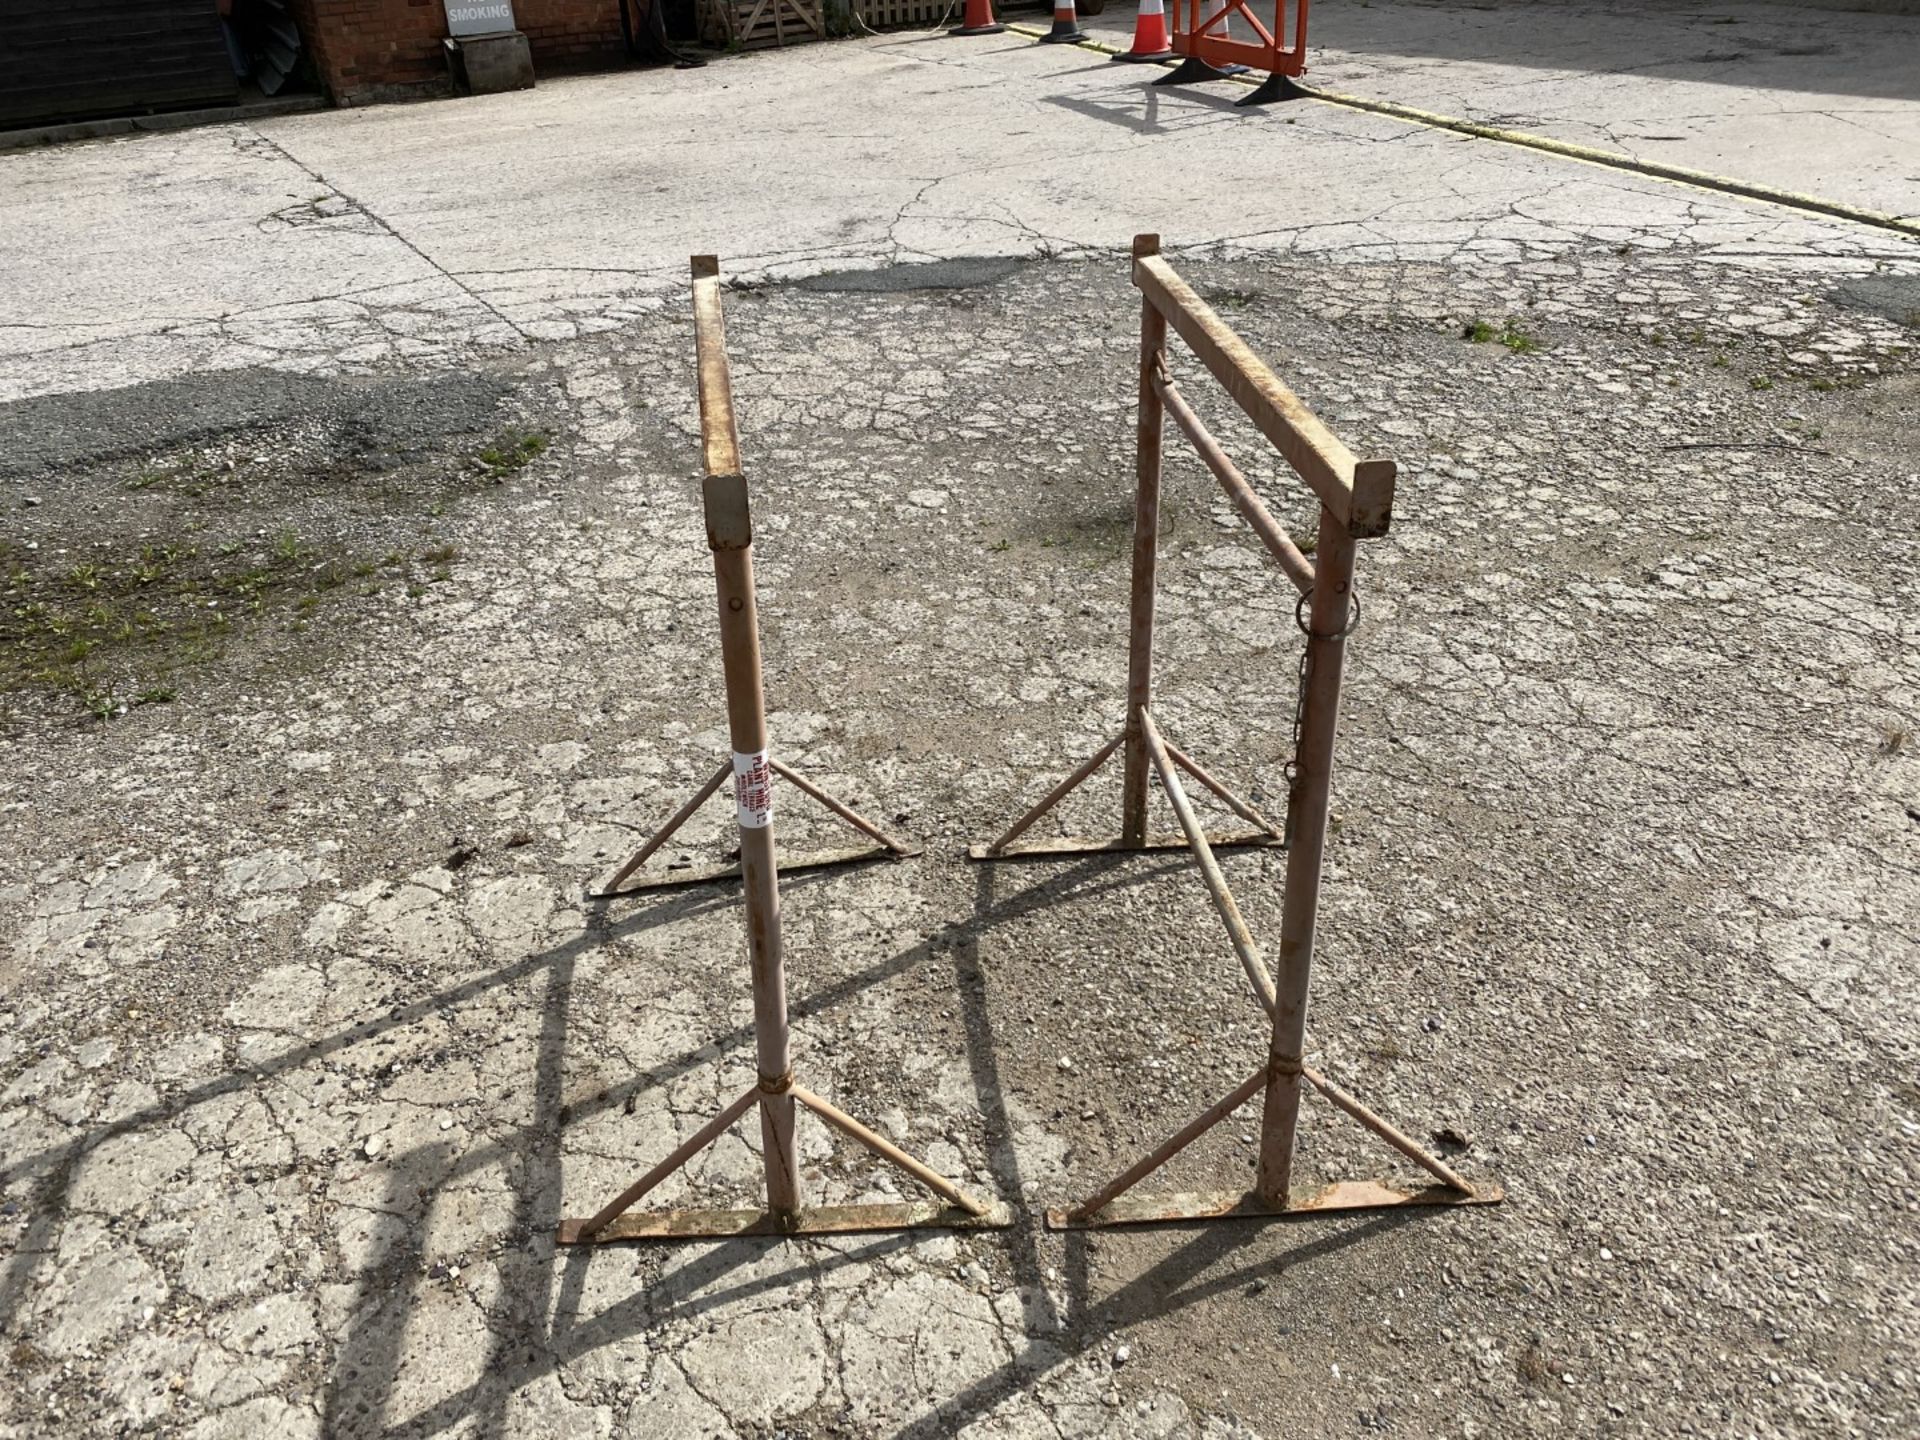 Pair of adjustable trestles - NOT TESTED